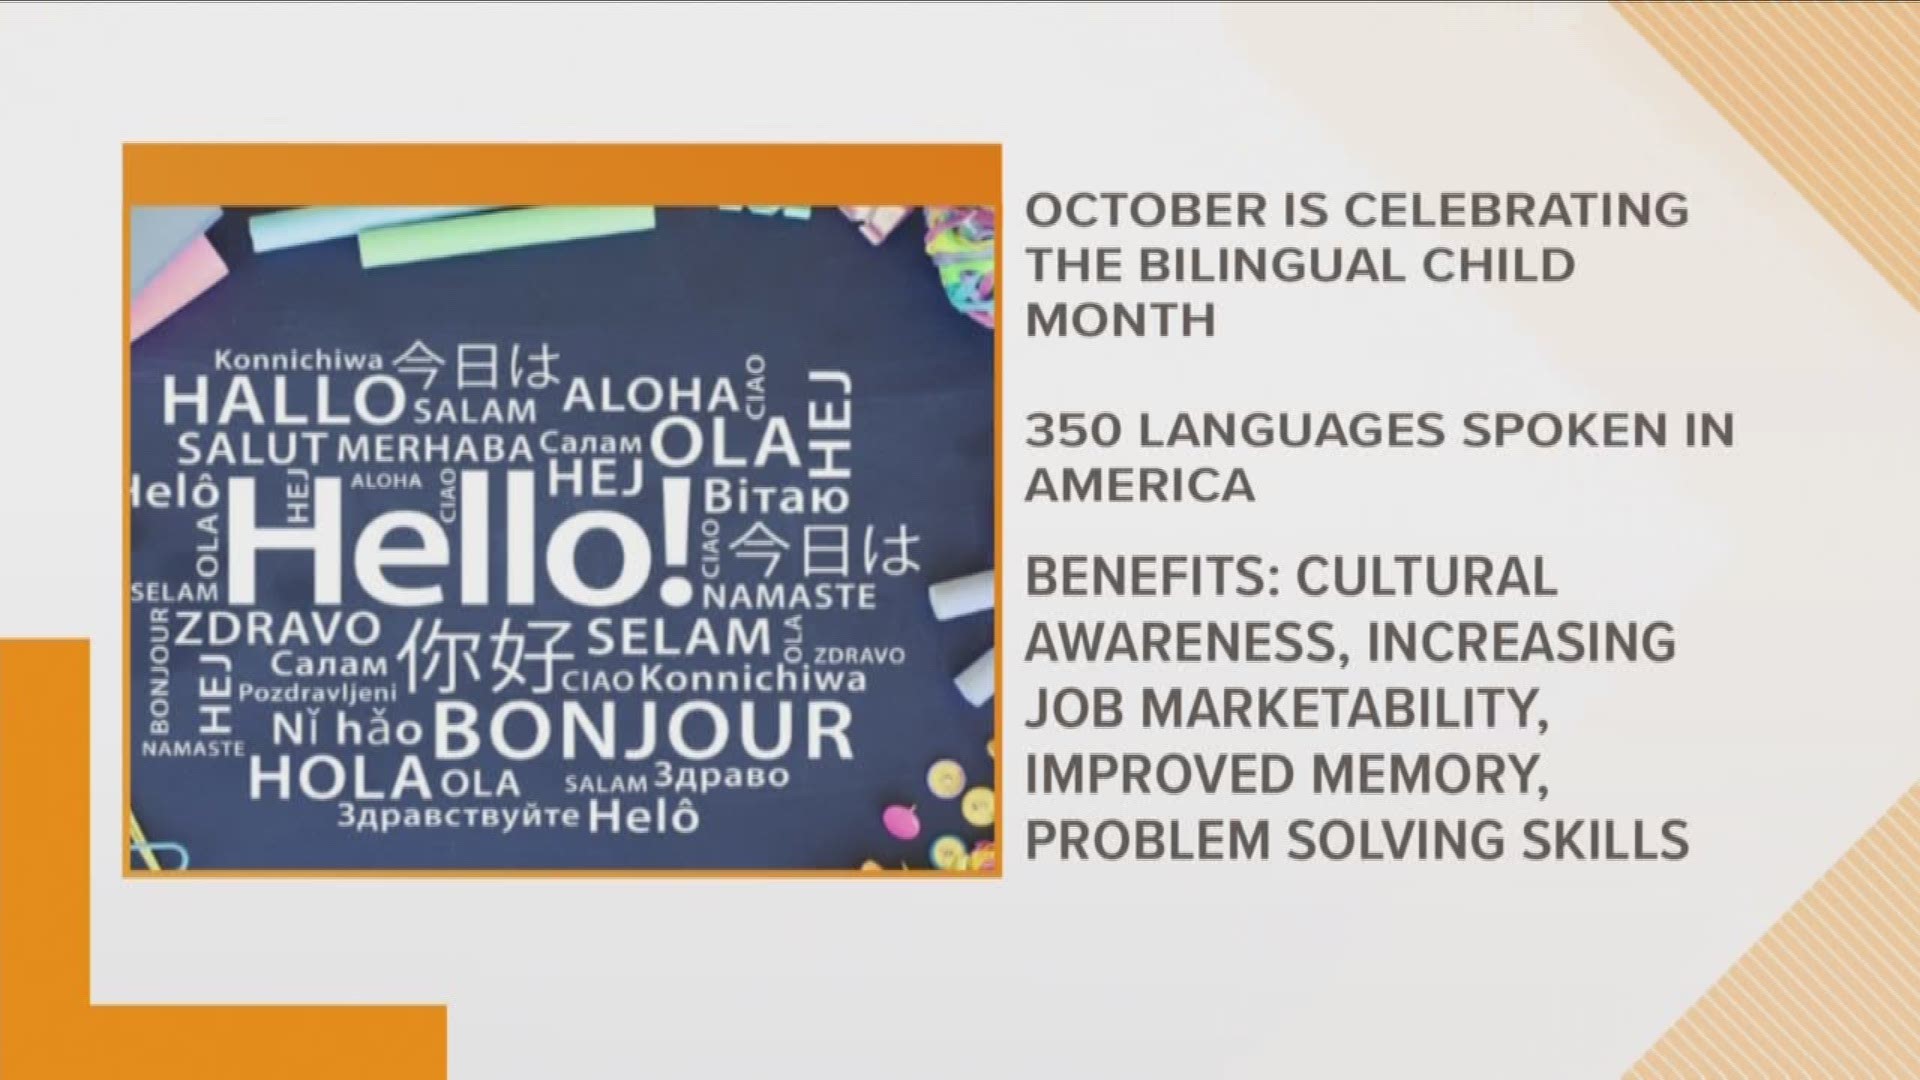 Cultural awareness, and problem solving skills are a few of the benefits of bilingualism. Here are tips to teach your child another language.